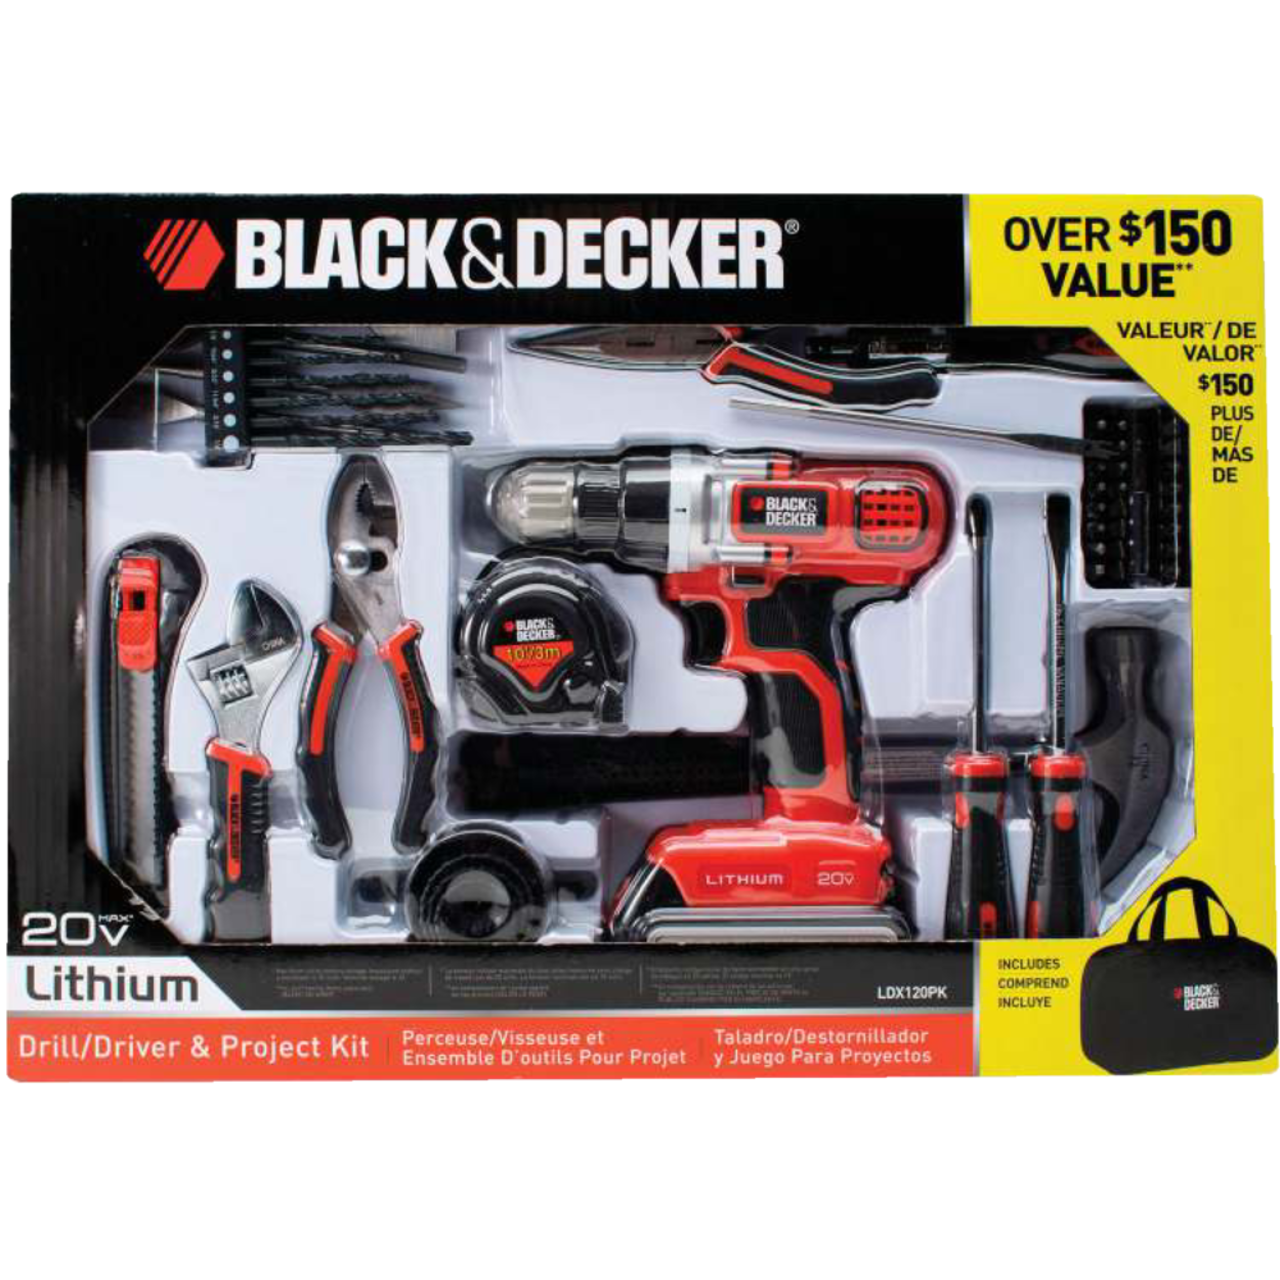 https://media-www.canadiantire.ca/product/fixing/tools/portable-power-tools/2992512/black-decker-20v-lithium-drill-project-kit-88c18ce0-df15-44e0-9446-bdb21d943b69.png?imdensity=1&imwidth=1244&impolicy=mZoom